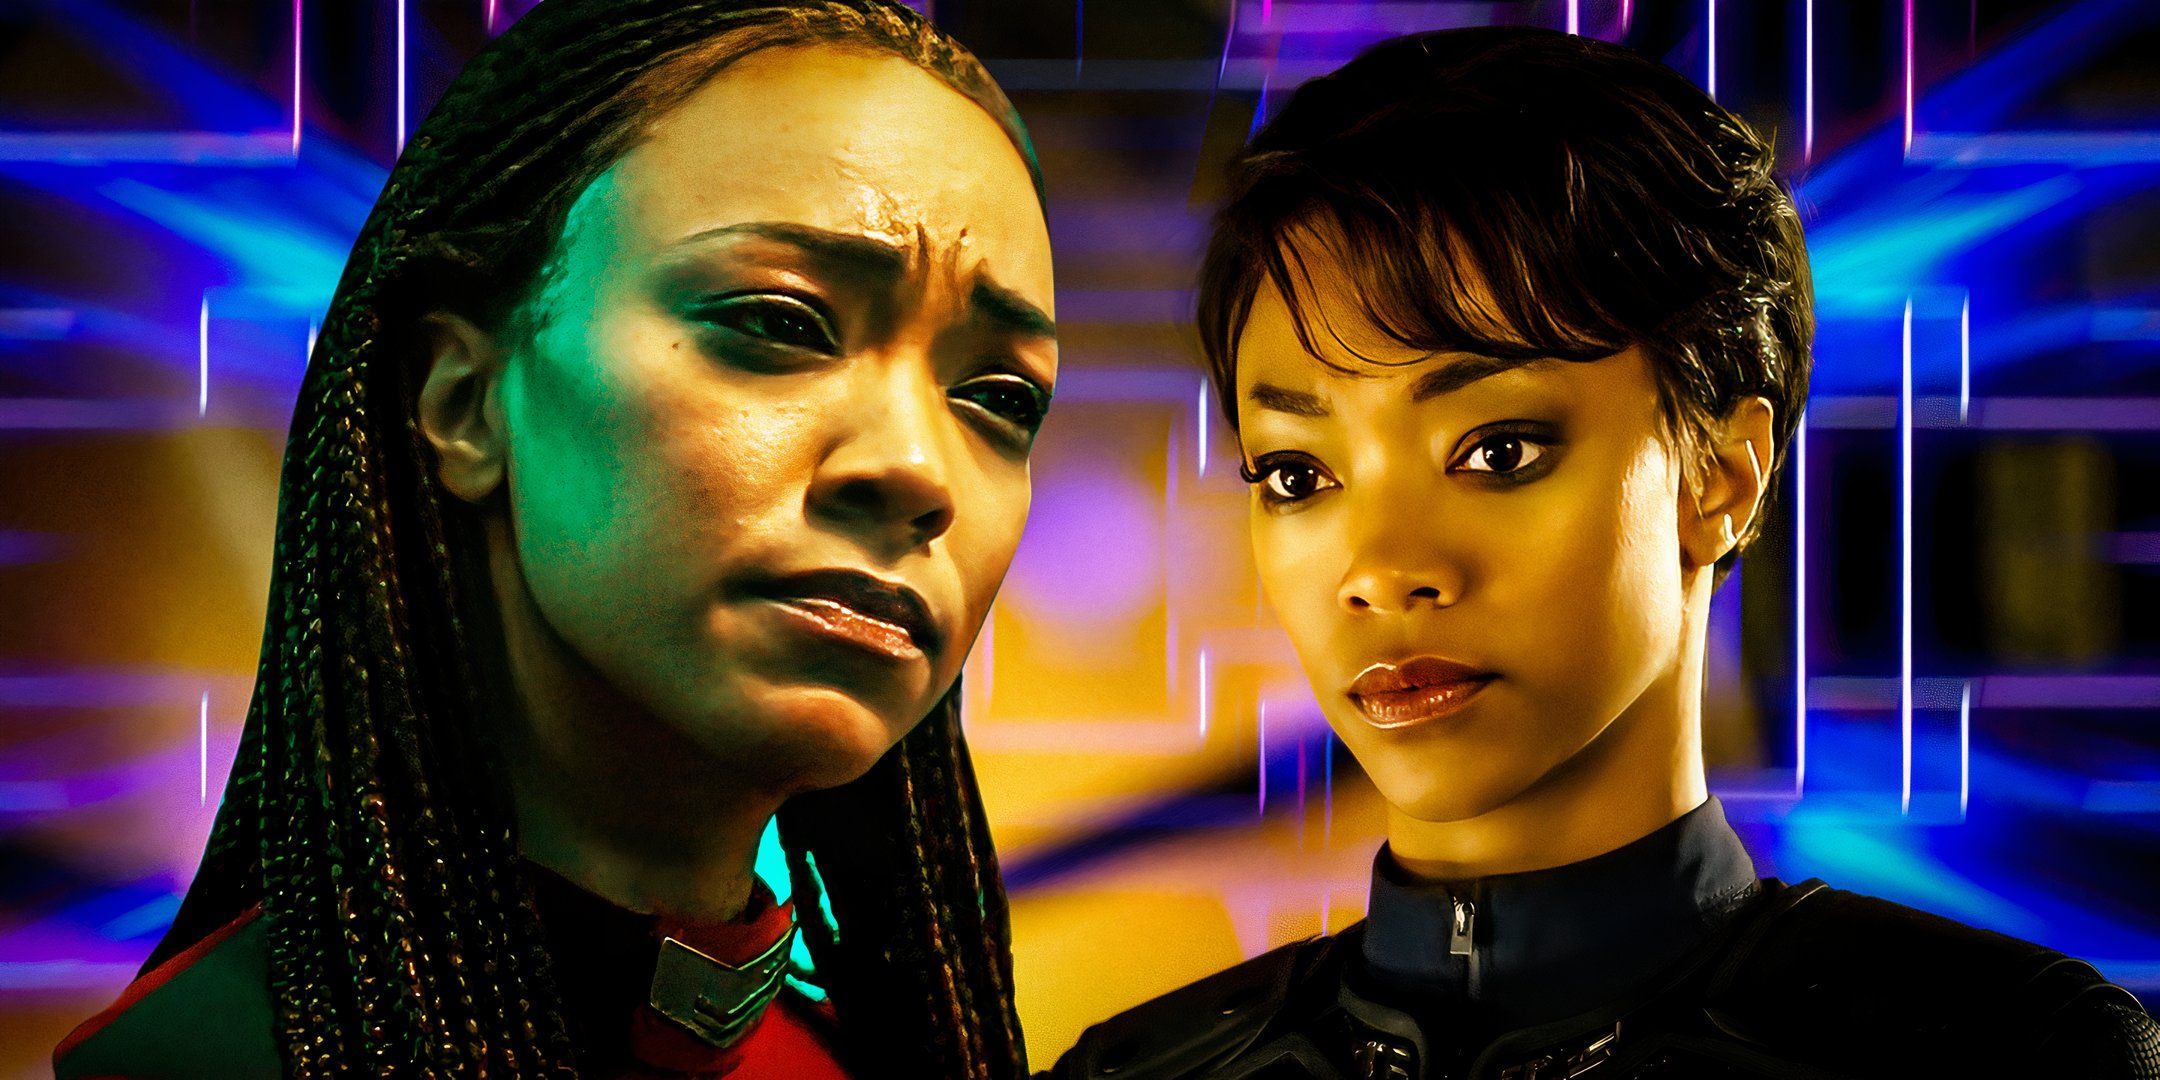 A collage of two images of Michael Burnham (Sonequa Martin-Green) from Star Trek: Discovery seasons 1 and 5 on a multicolored background.